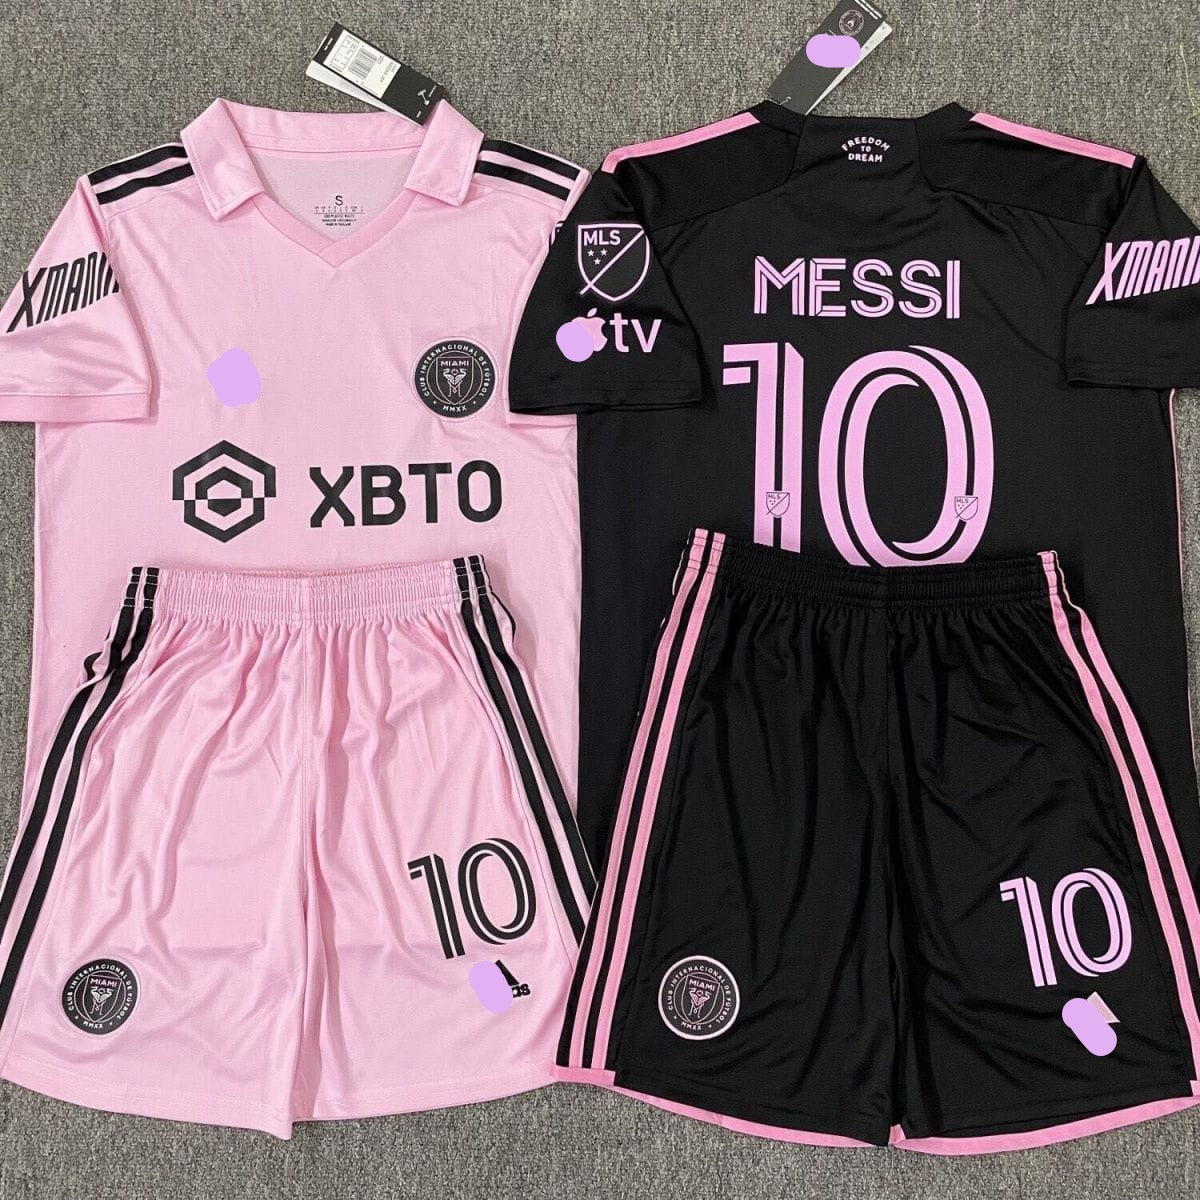 Lionel Messi Miami Pink/Argentina Jersey Youth Kids Adults - The GoatFind Miami Messi Jersey Set Pink / 16 Kids, Miami Messi Jersey Set Pink / 18 Kids, Miami Messi Jersey Set Pink / 20 Kids, Miami Messi Jersey Set Pink / 22 Kids, Miami Messi Jersey Set Pink / 24 Kids, Miami Messi Jersey Set Pink / 26 Kids, Miami Messi Jersey Set Pink / 28 Kids, Miami Messi Jersey Set Pink / XS, Miami Messi Jersey Set Pink / S, Miami Messi Jersey Set Pink / M